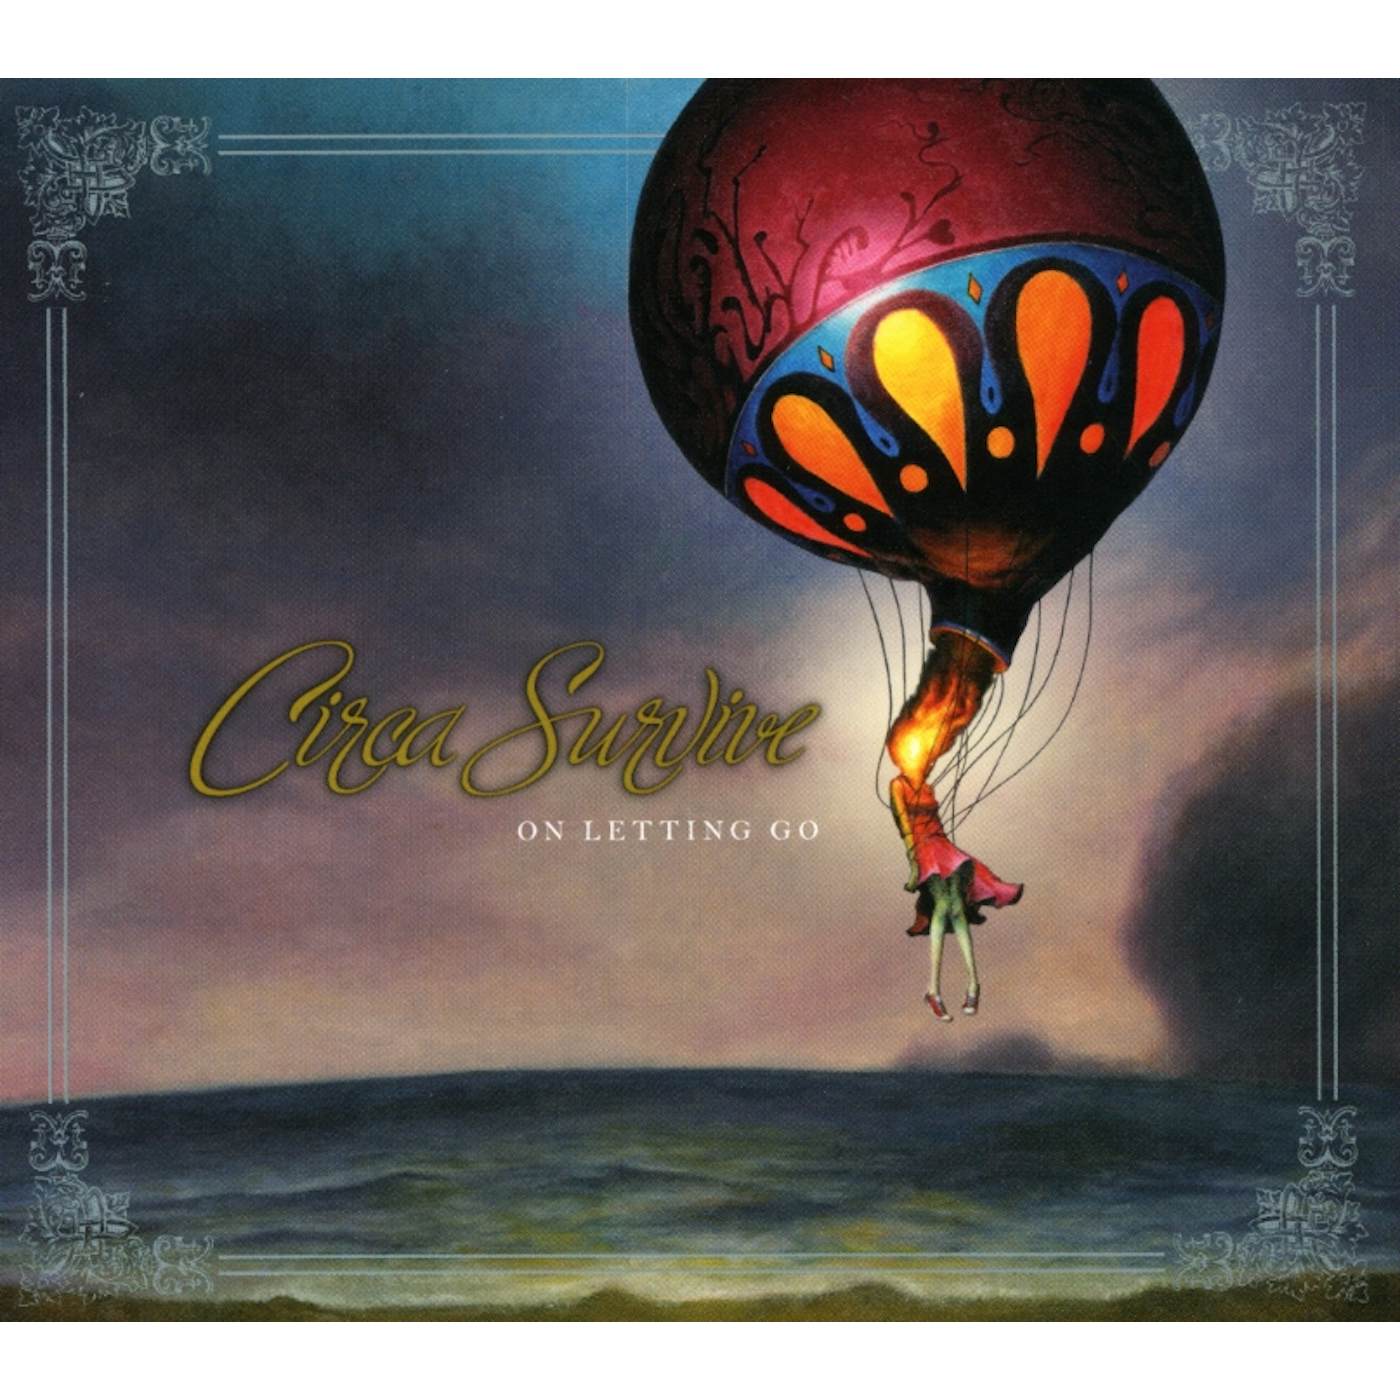 Circa Survive ON LETTING GO CD